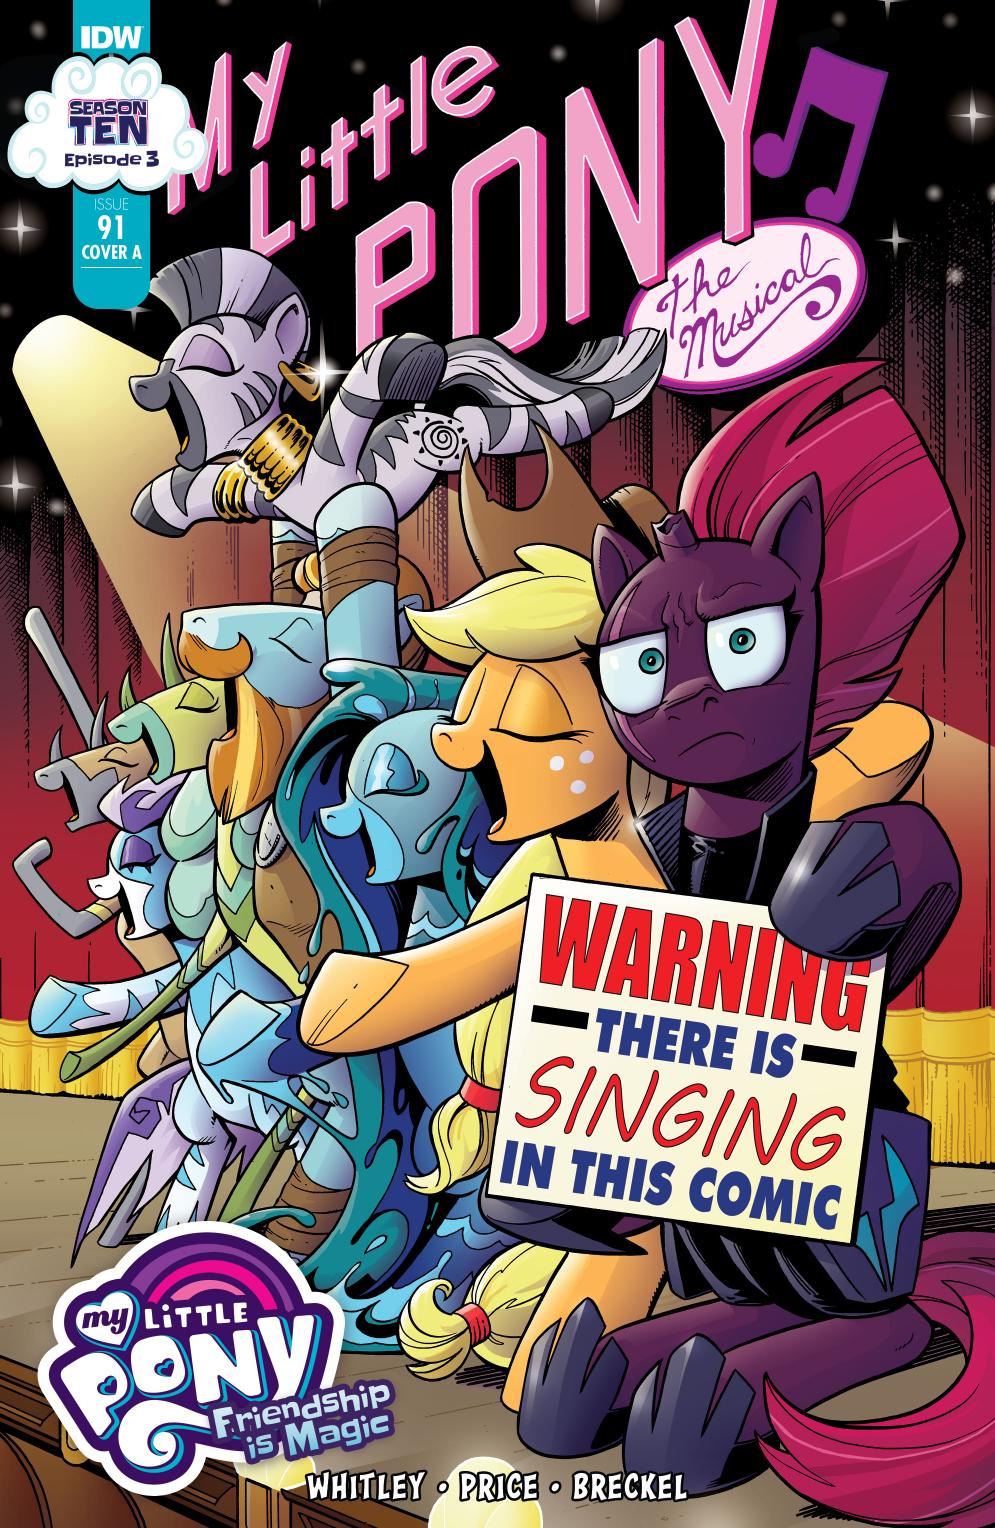 My Little Pony, Friendship is Magic #91 by Jeremy Whitley Andy Price